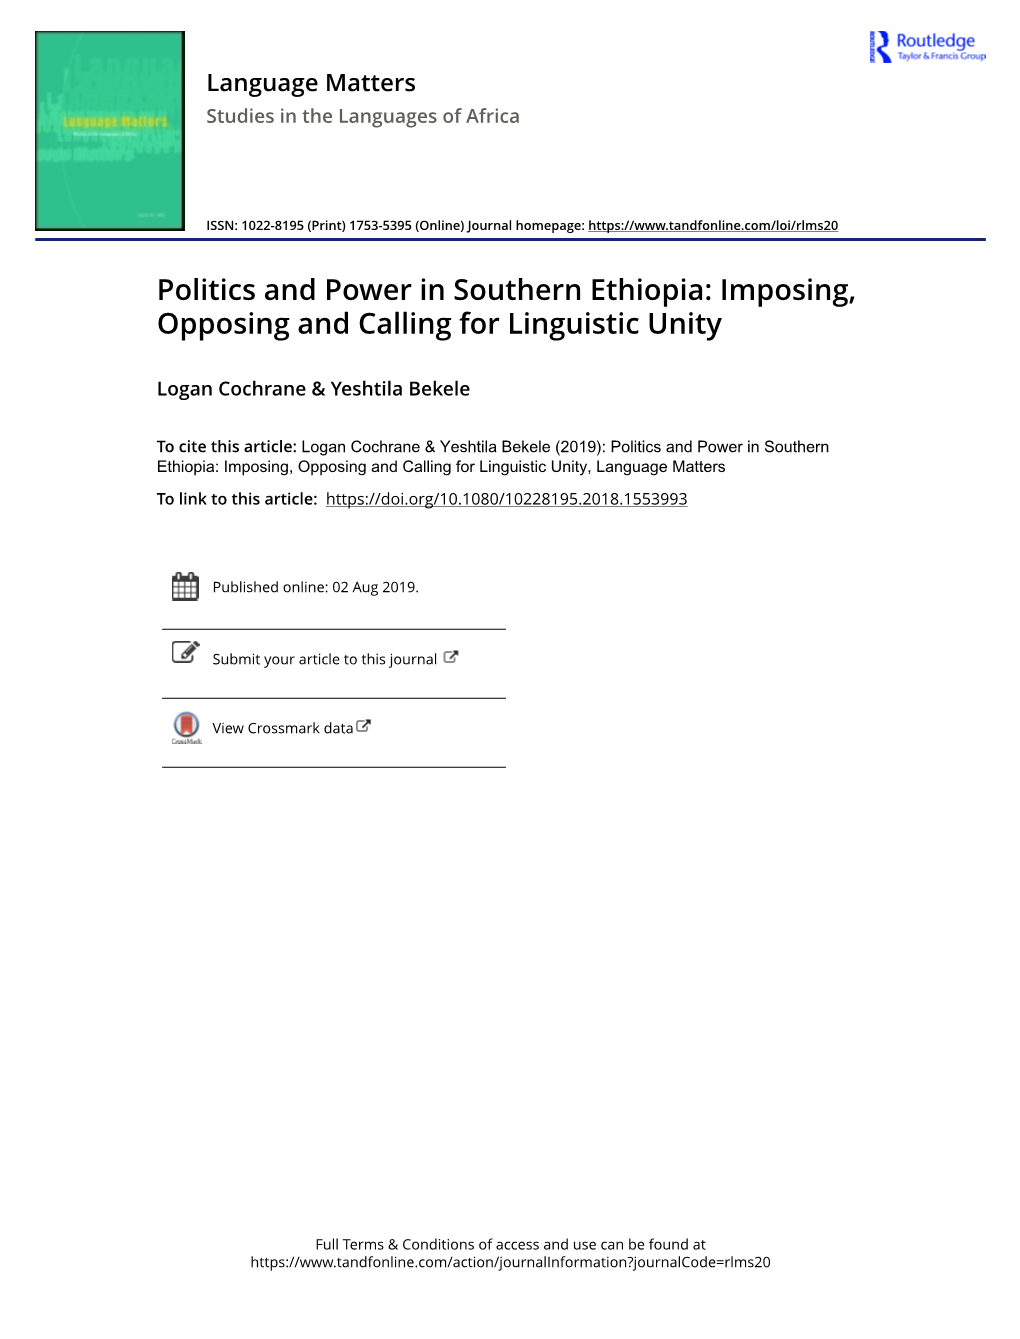 Politics and Power in Southern Ethiopia: Imposing, Opposing and Calling for Linguistic Unity